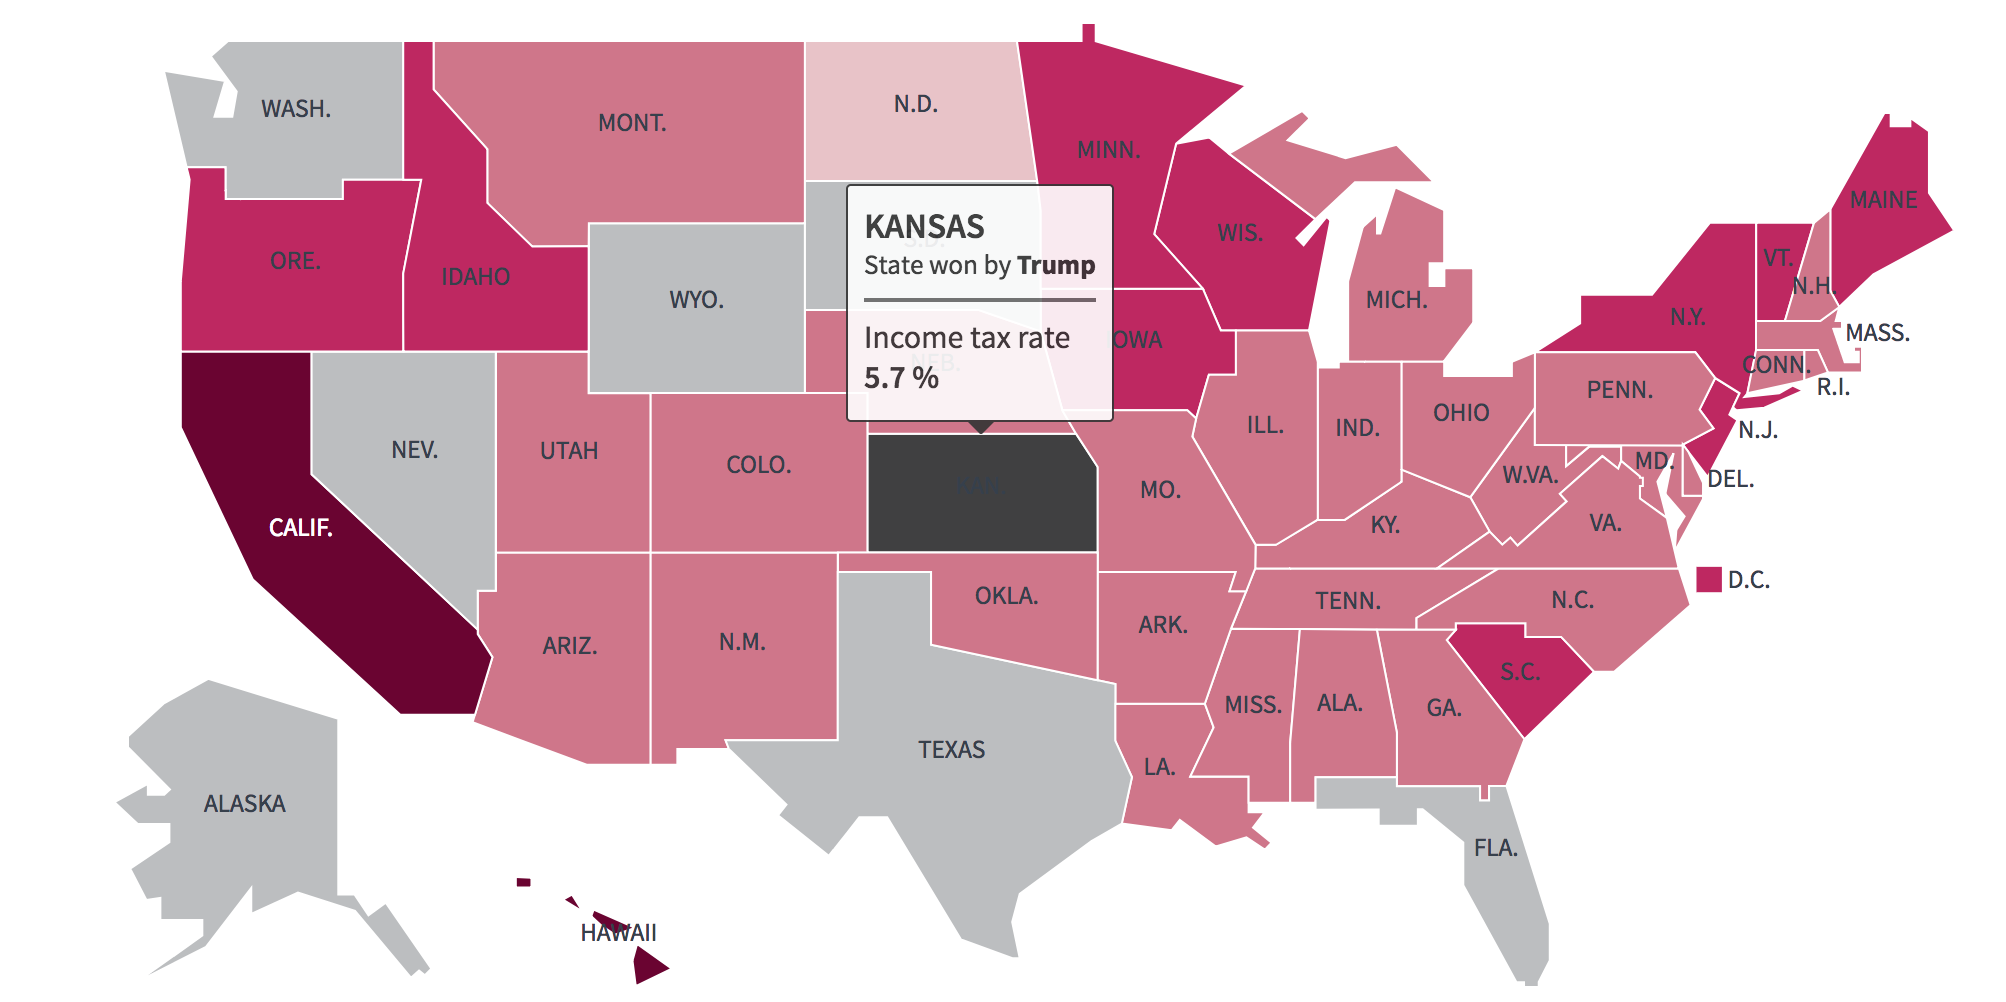 U.S. states with the highest and lowest income tax rates